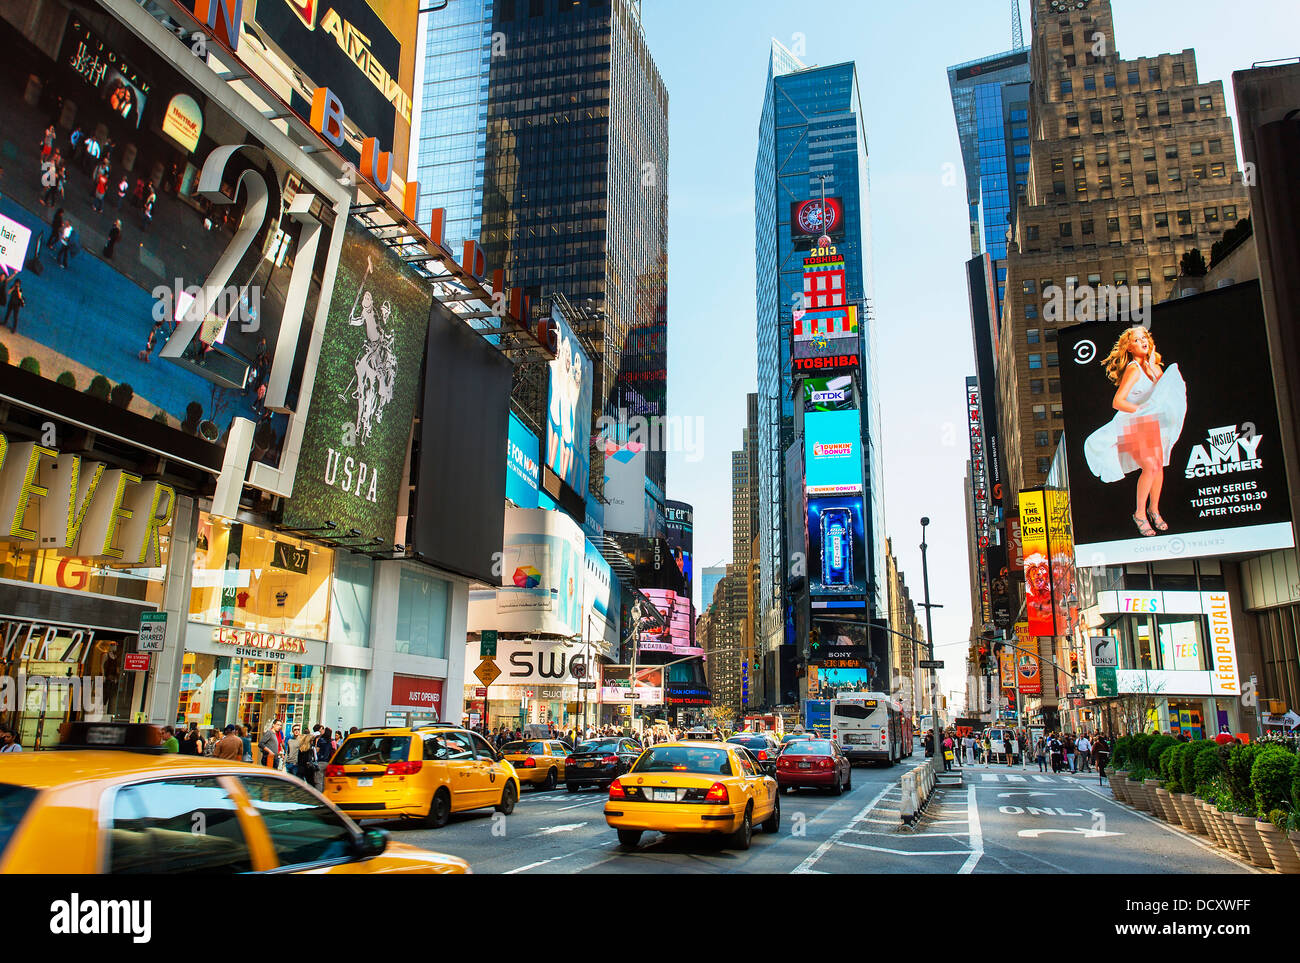 New York City Times square Stock Photo